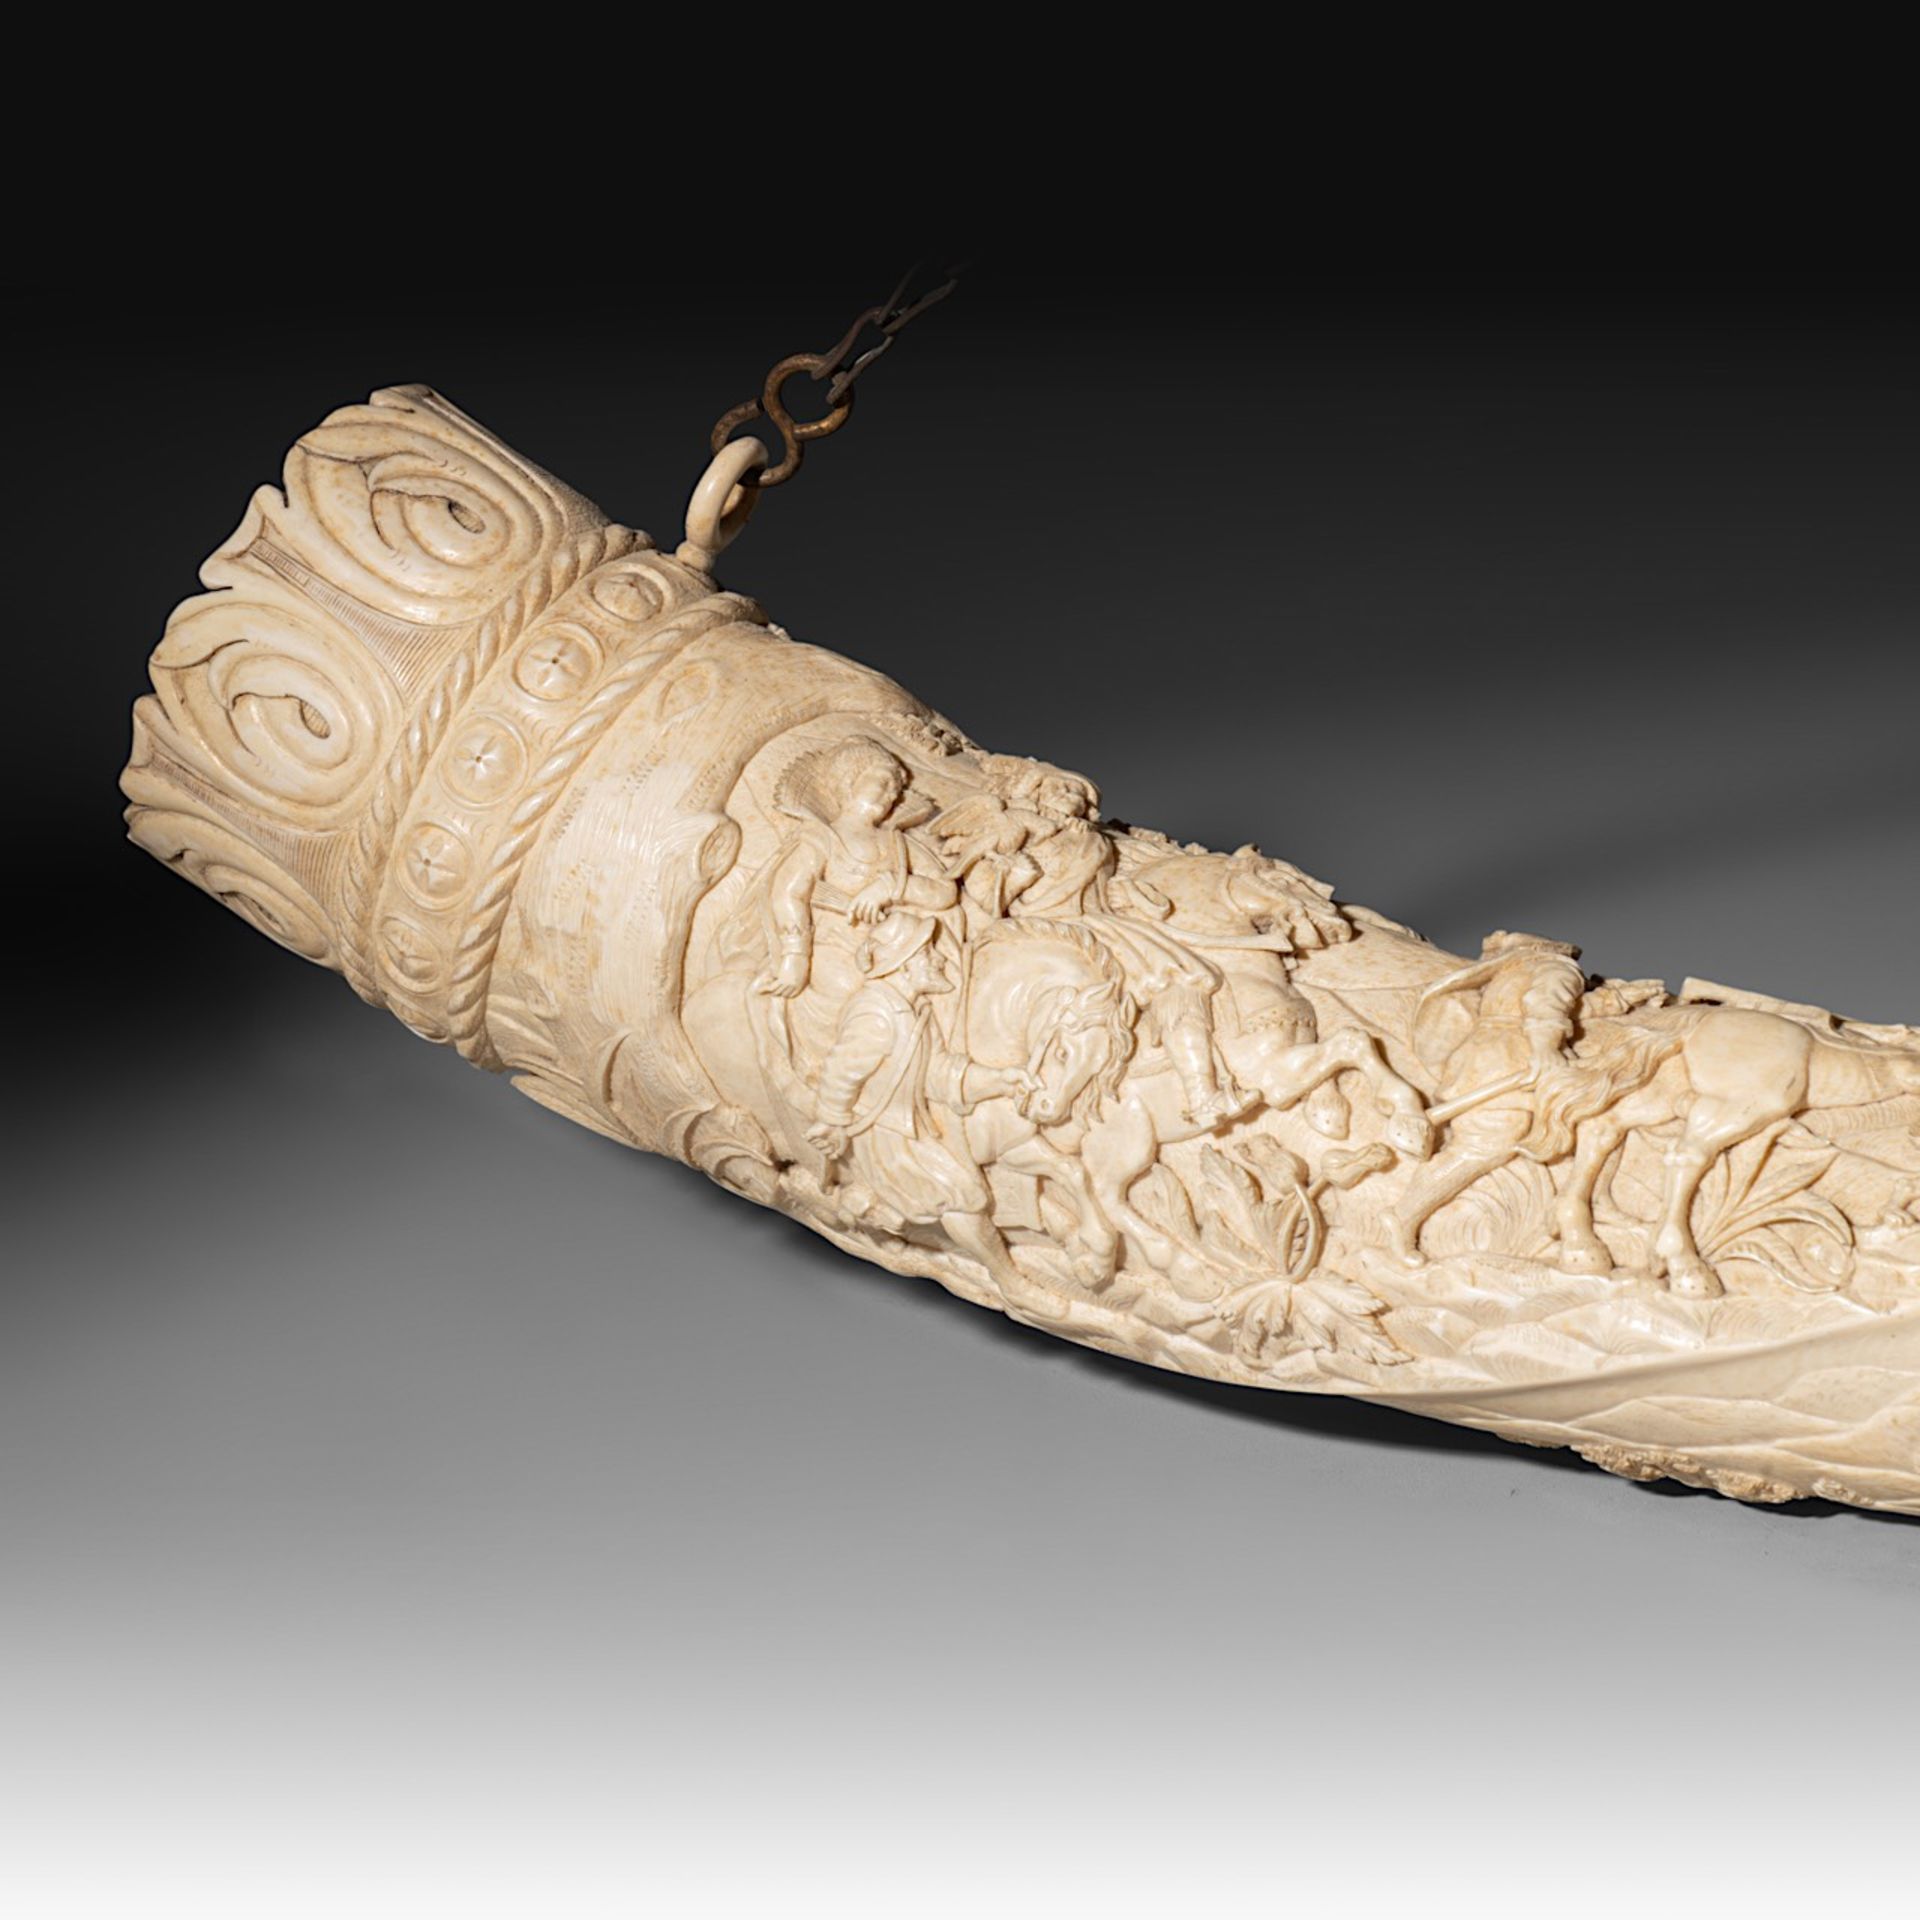 A 19th-century ivory hunting horn, last quarter 19th century, W 74,5 cm - 2850 g (+) - Image 11 of 11